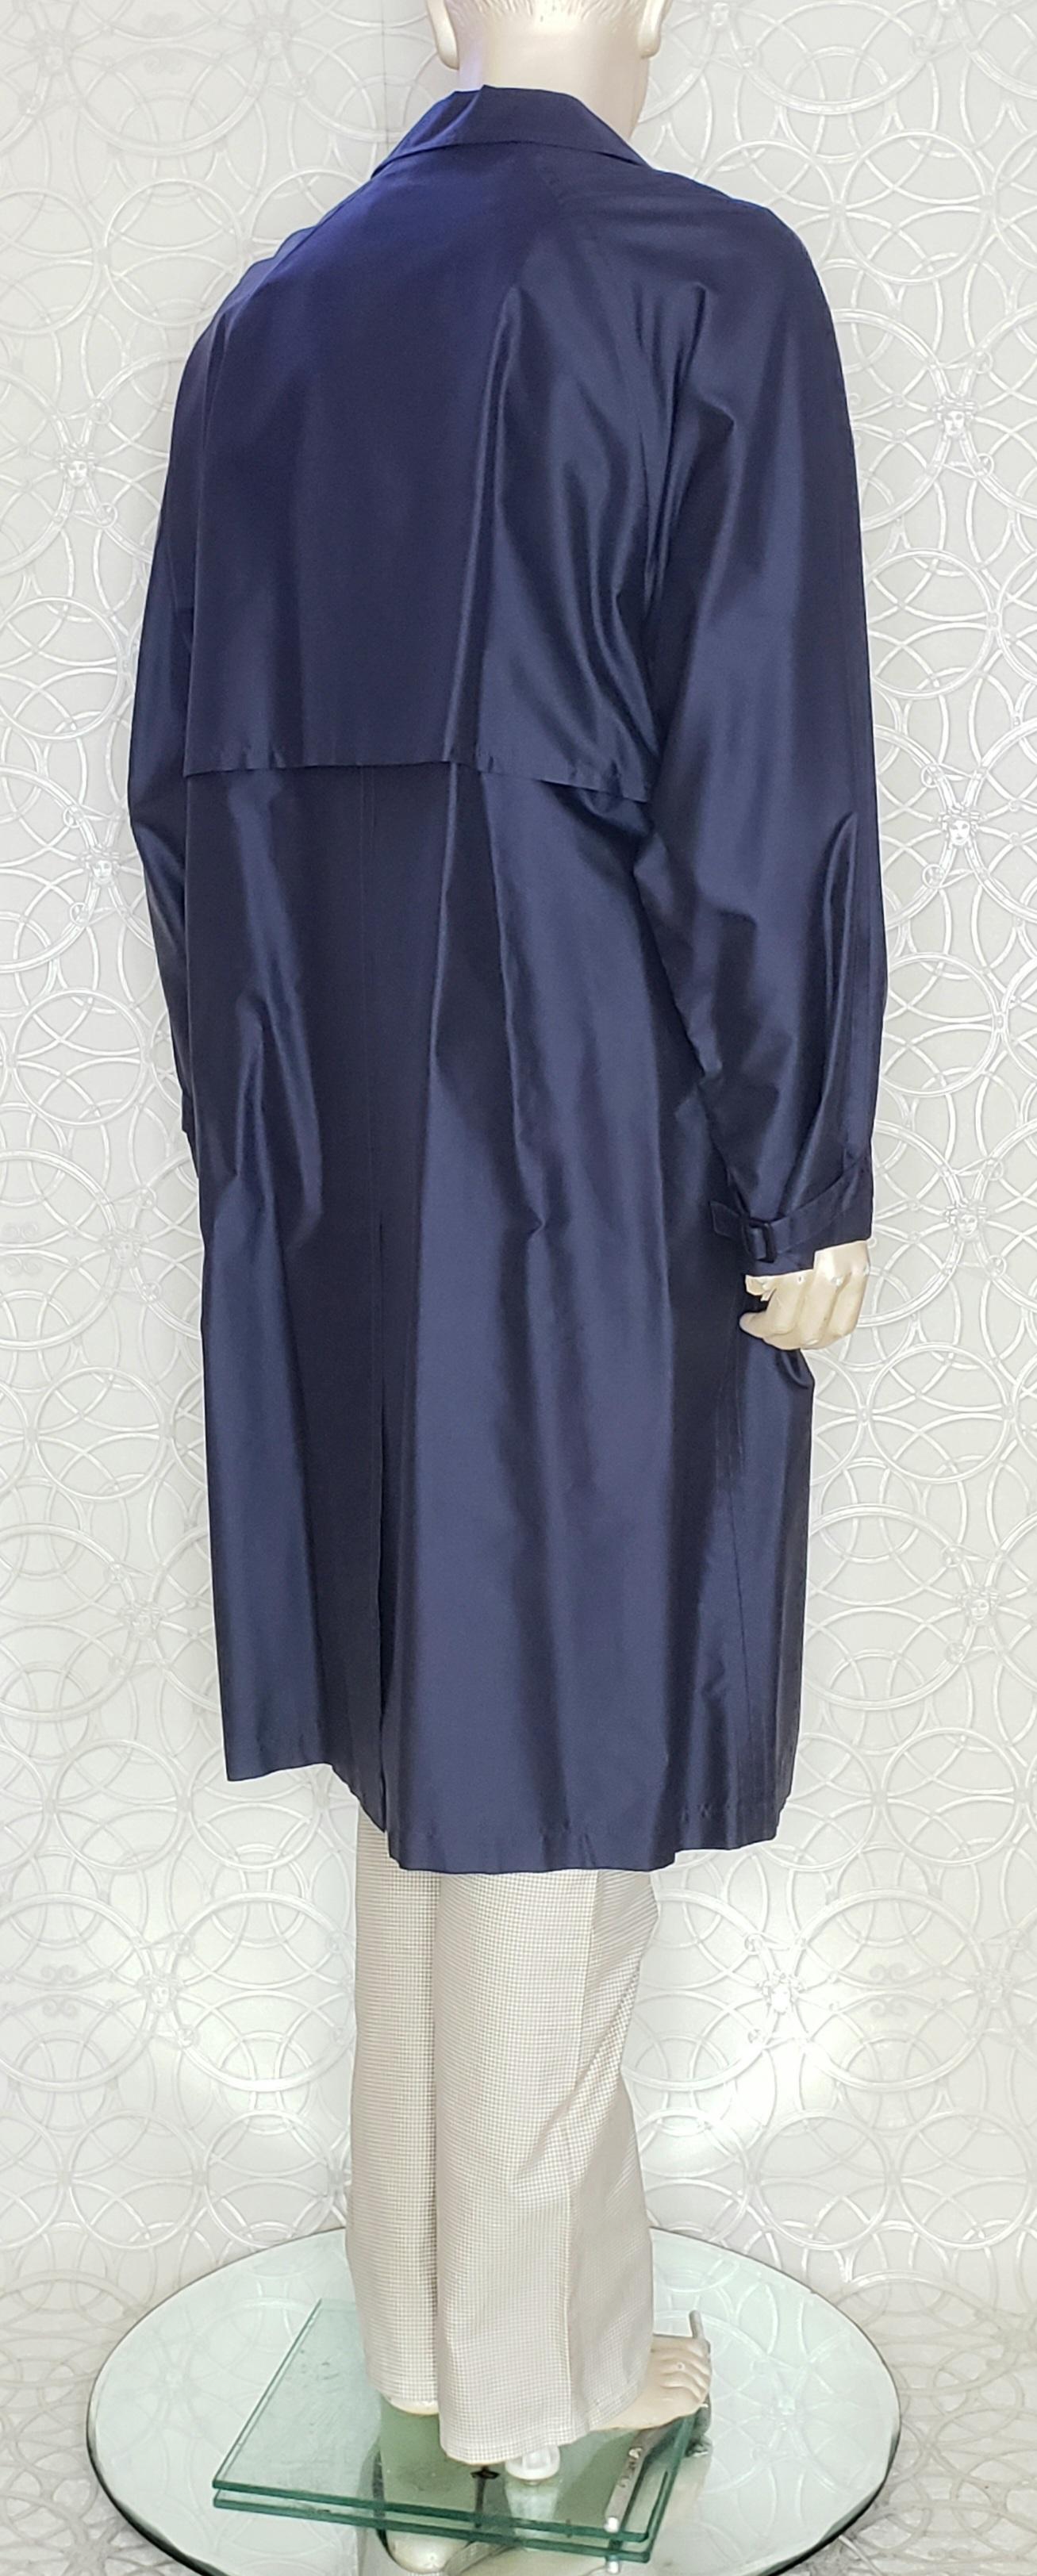 S/S 2016 Look # 34 VERSACE BELTED NAVY BLUE TRENCH SILK COAT 50 - 40 For Sale 2